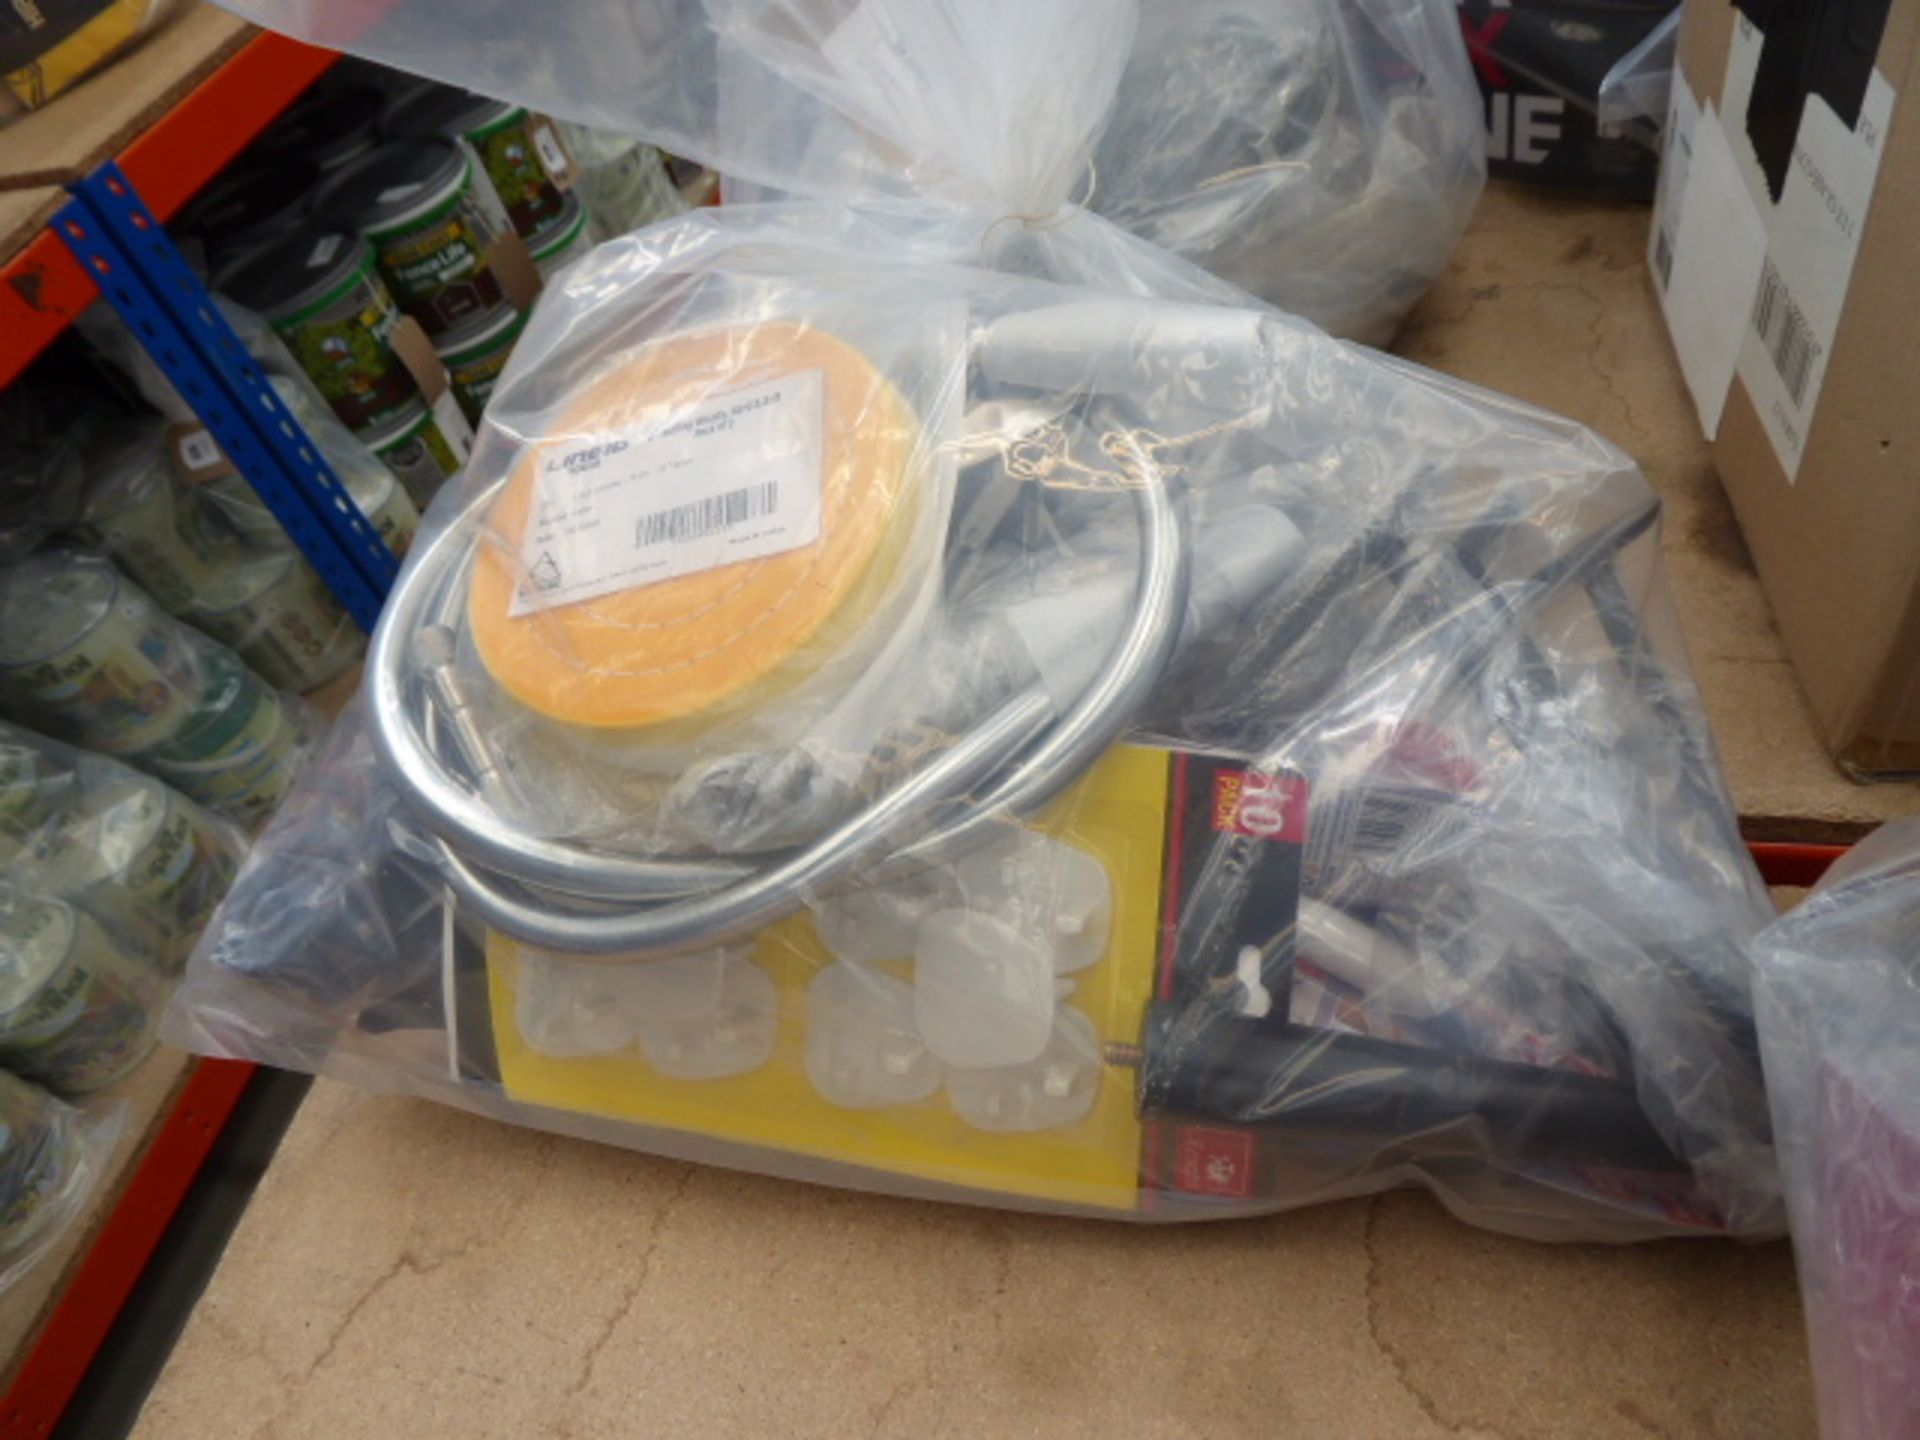 Bag containing cable, micrometers, drill bits, bike racks, buffing wheels, shower hoses etc.